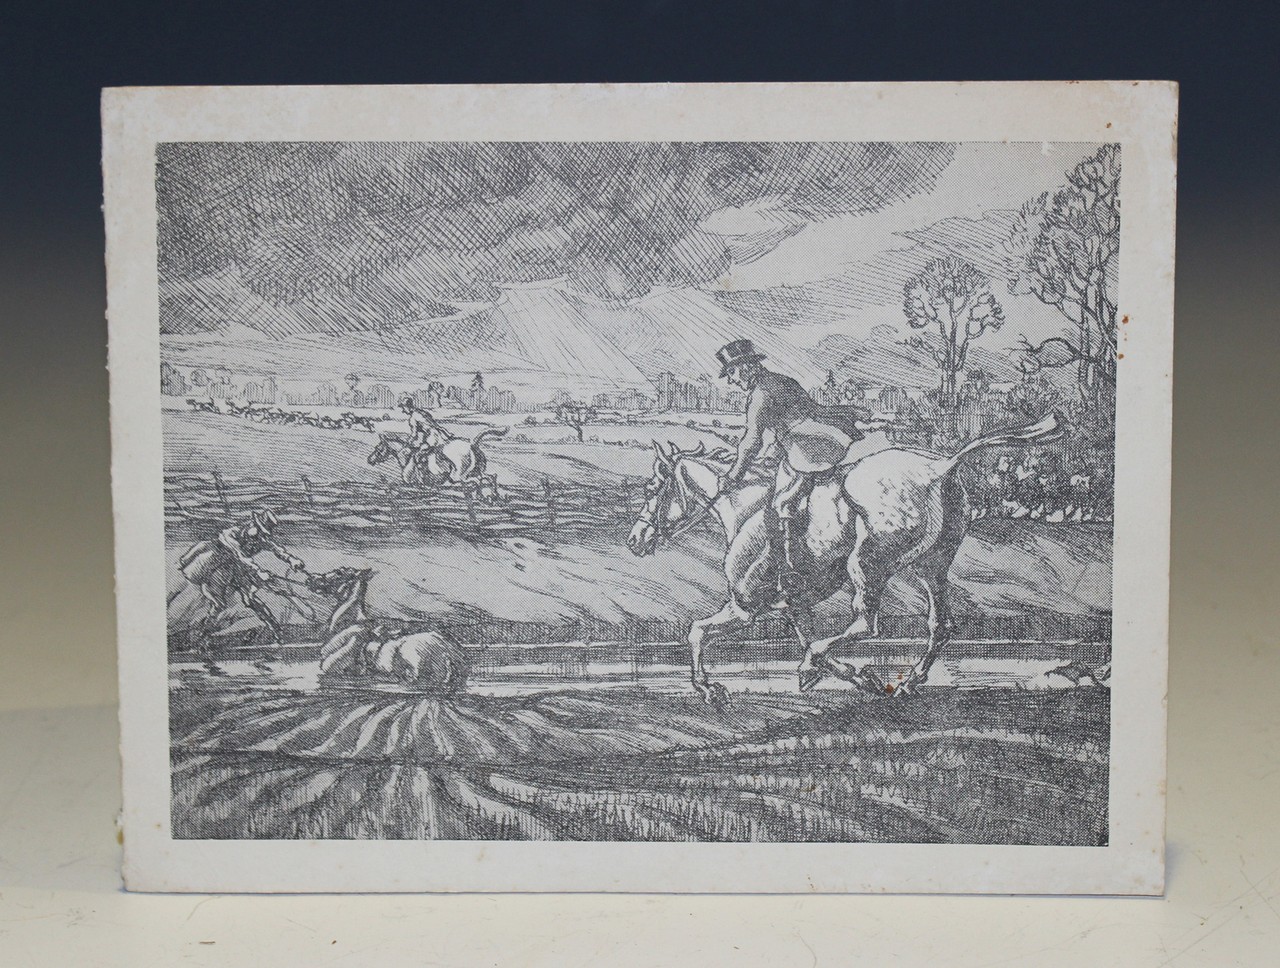 Geoffrey Sparrow - 'Who-oop! The Crawley & Horsham Hounds', monochrome aquatint, signed, titled - Image 3 of 3